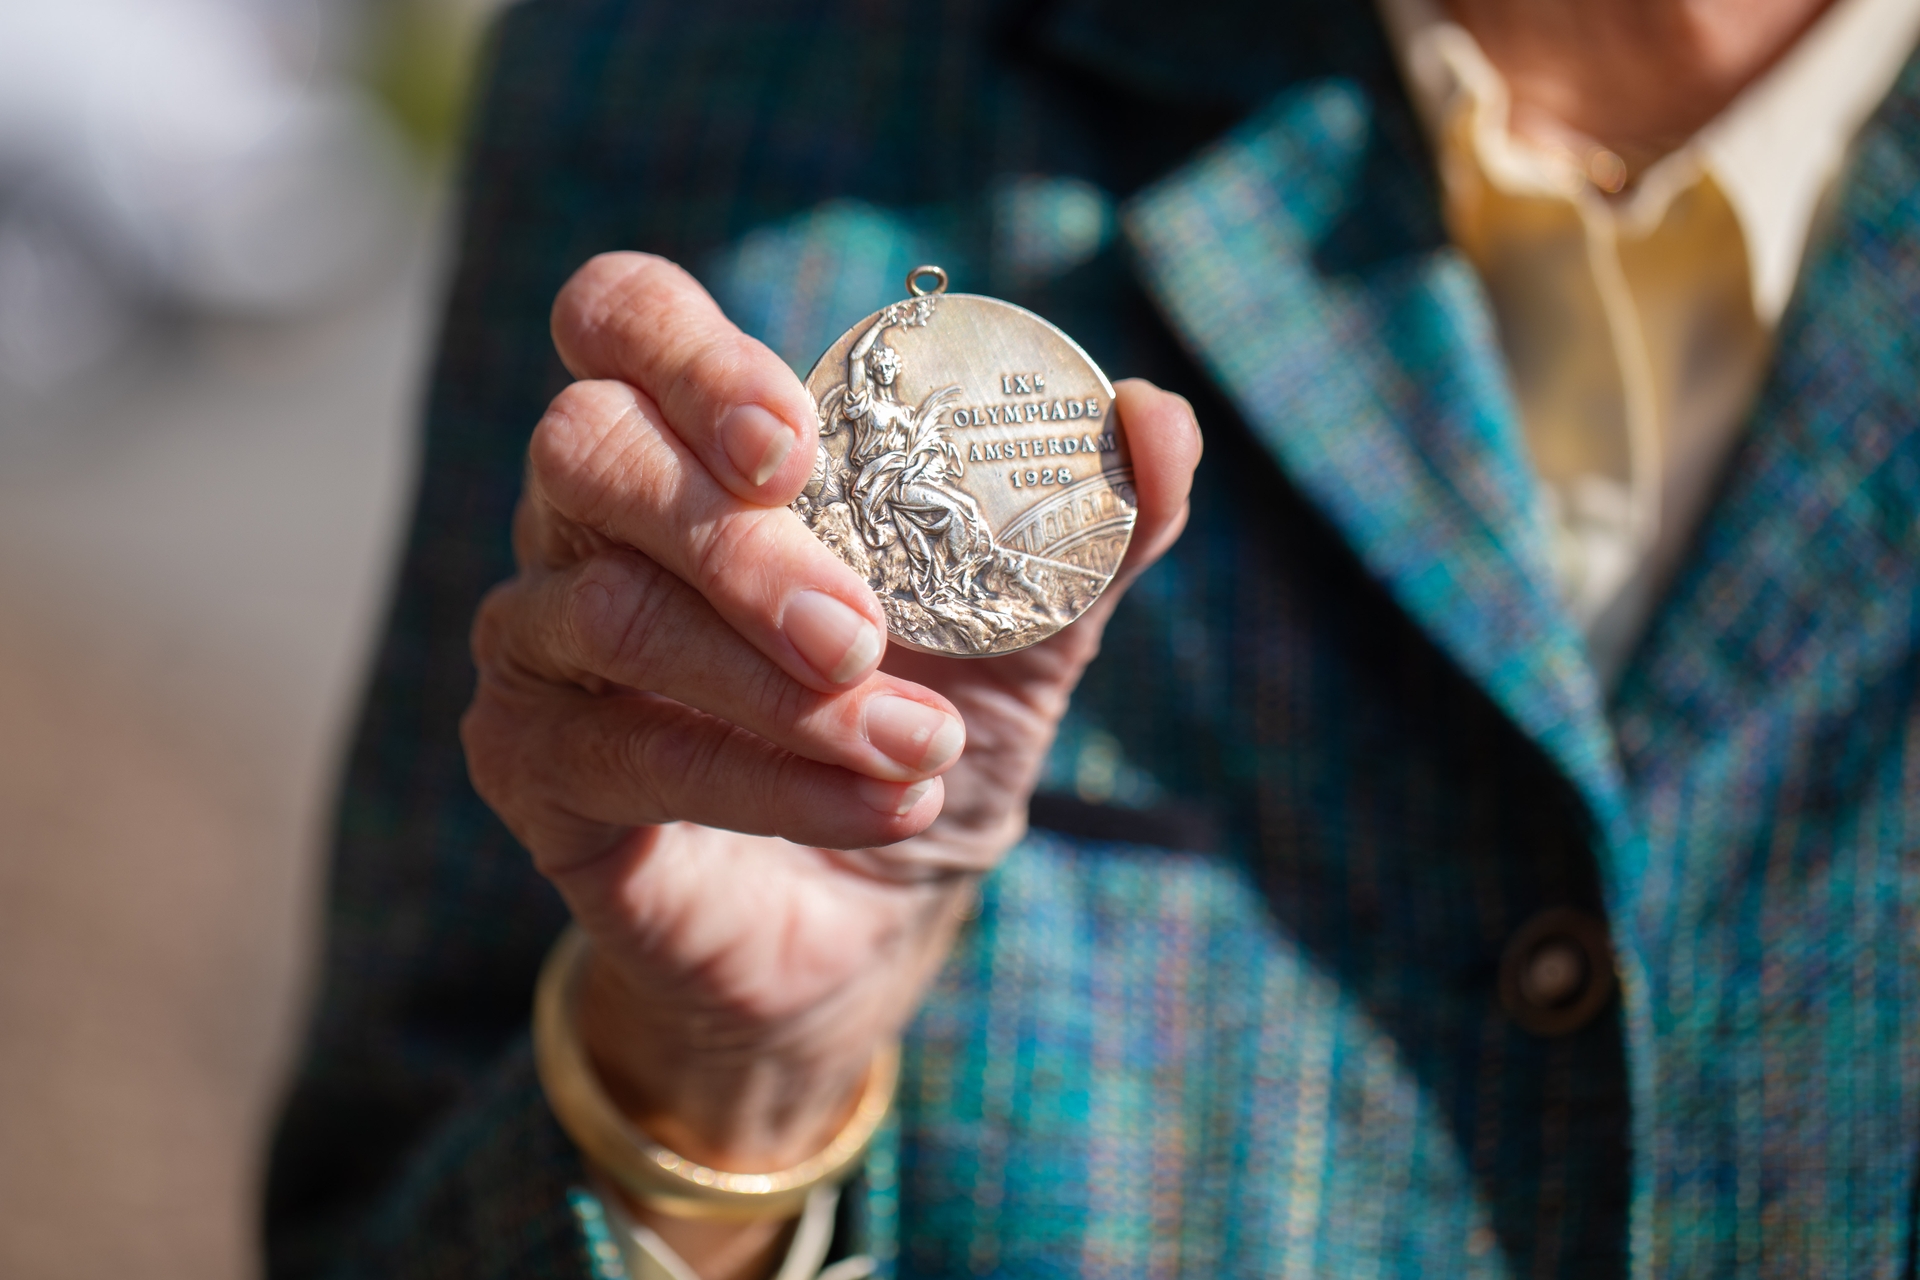 a photo of a hand extended outward and holding an Olympic gold medal from 1928 from Amsterdam